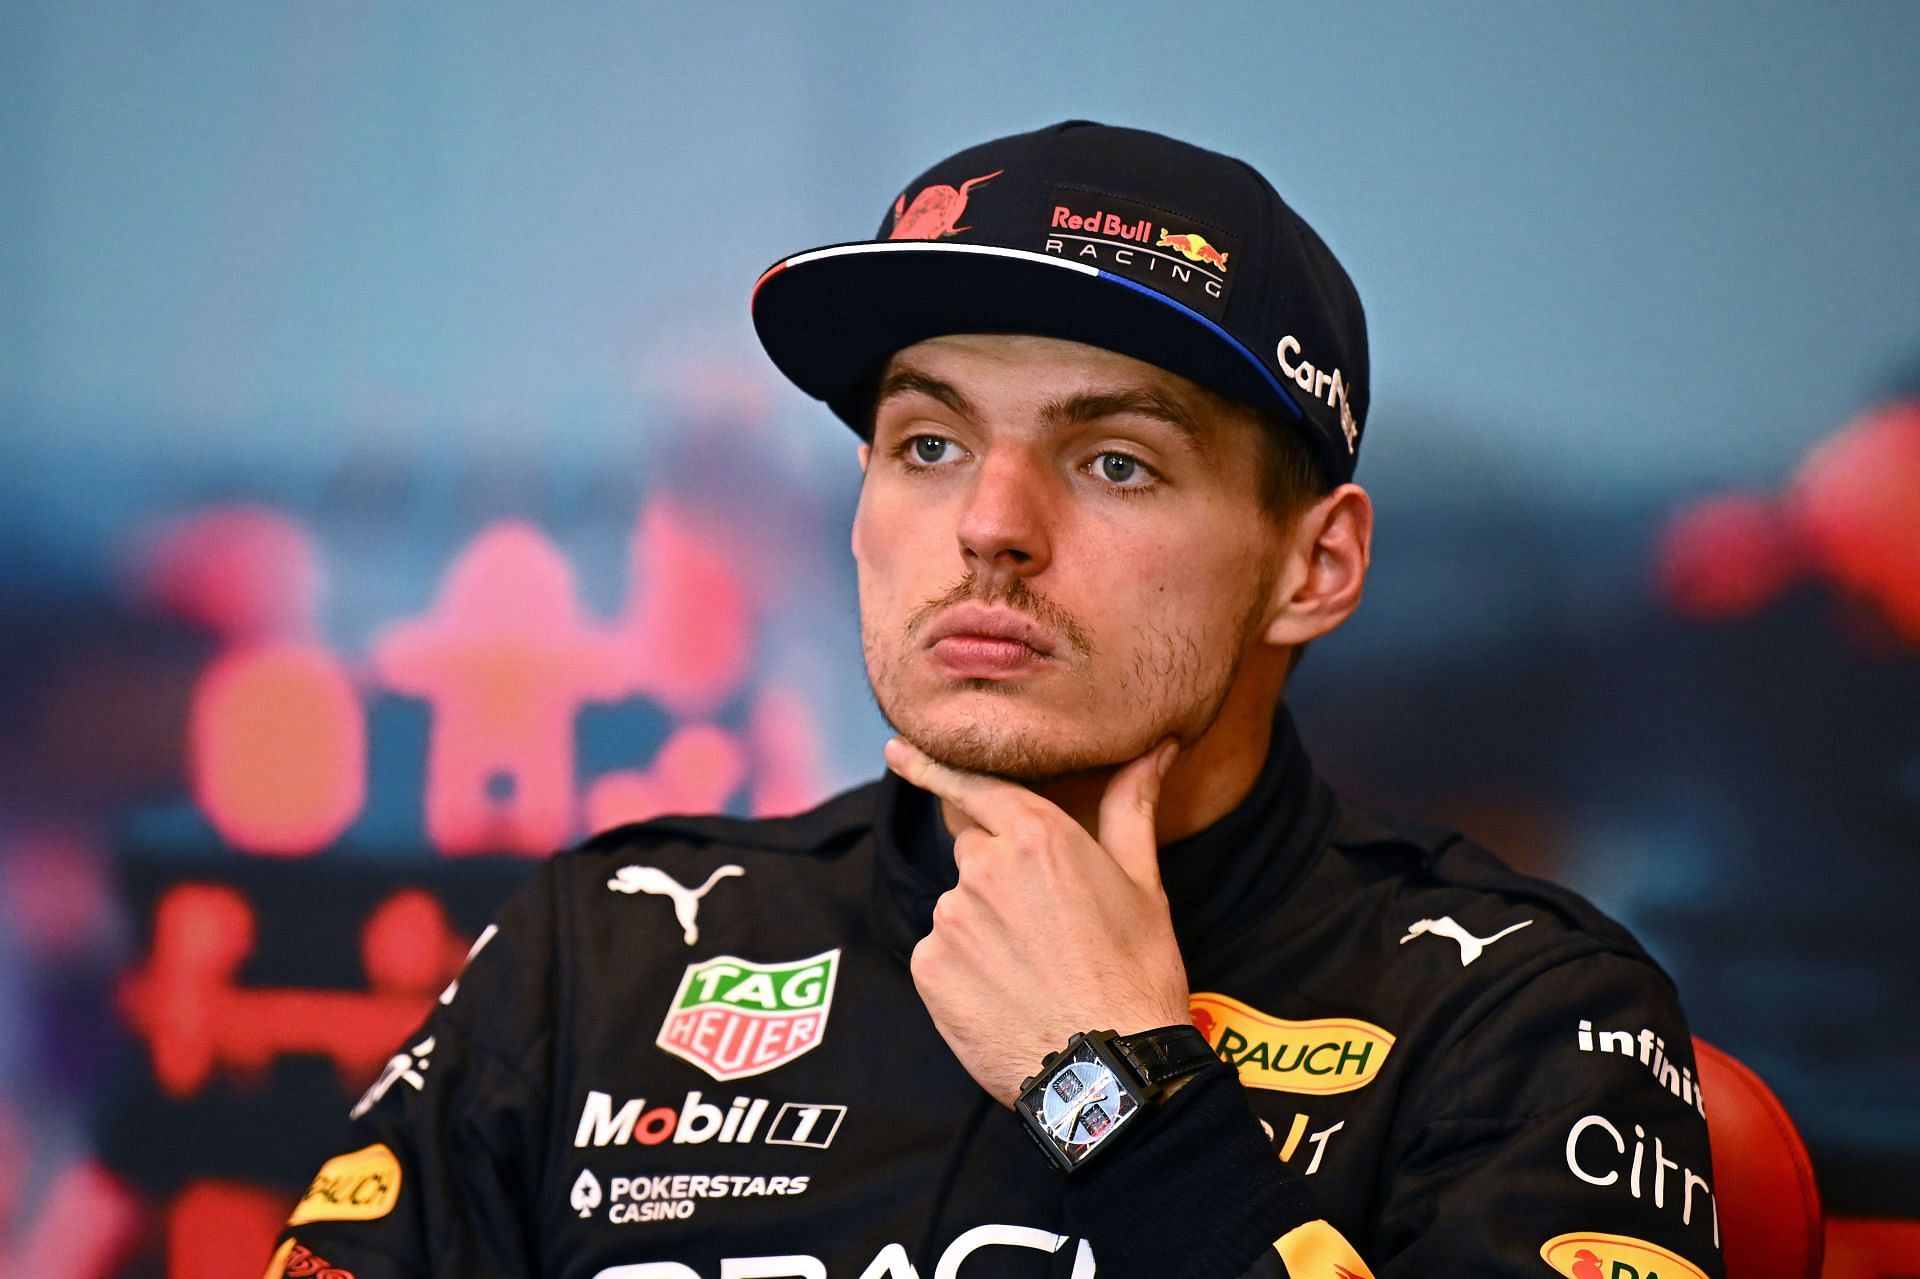 Max Verstappen is not sure what path he will take once the Red Bull contract expires in 2028